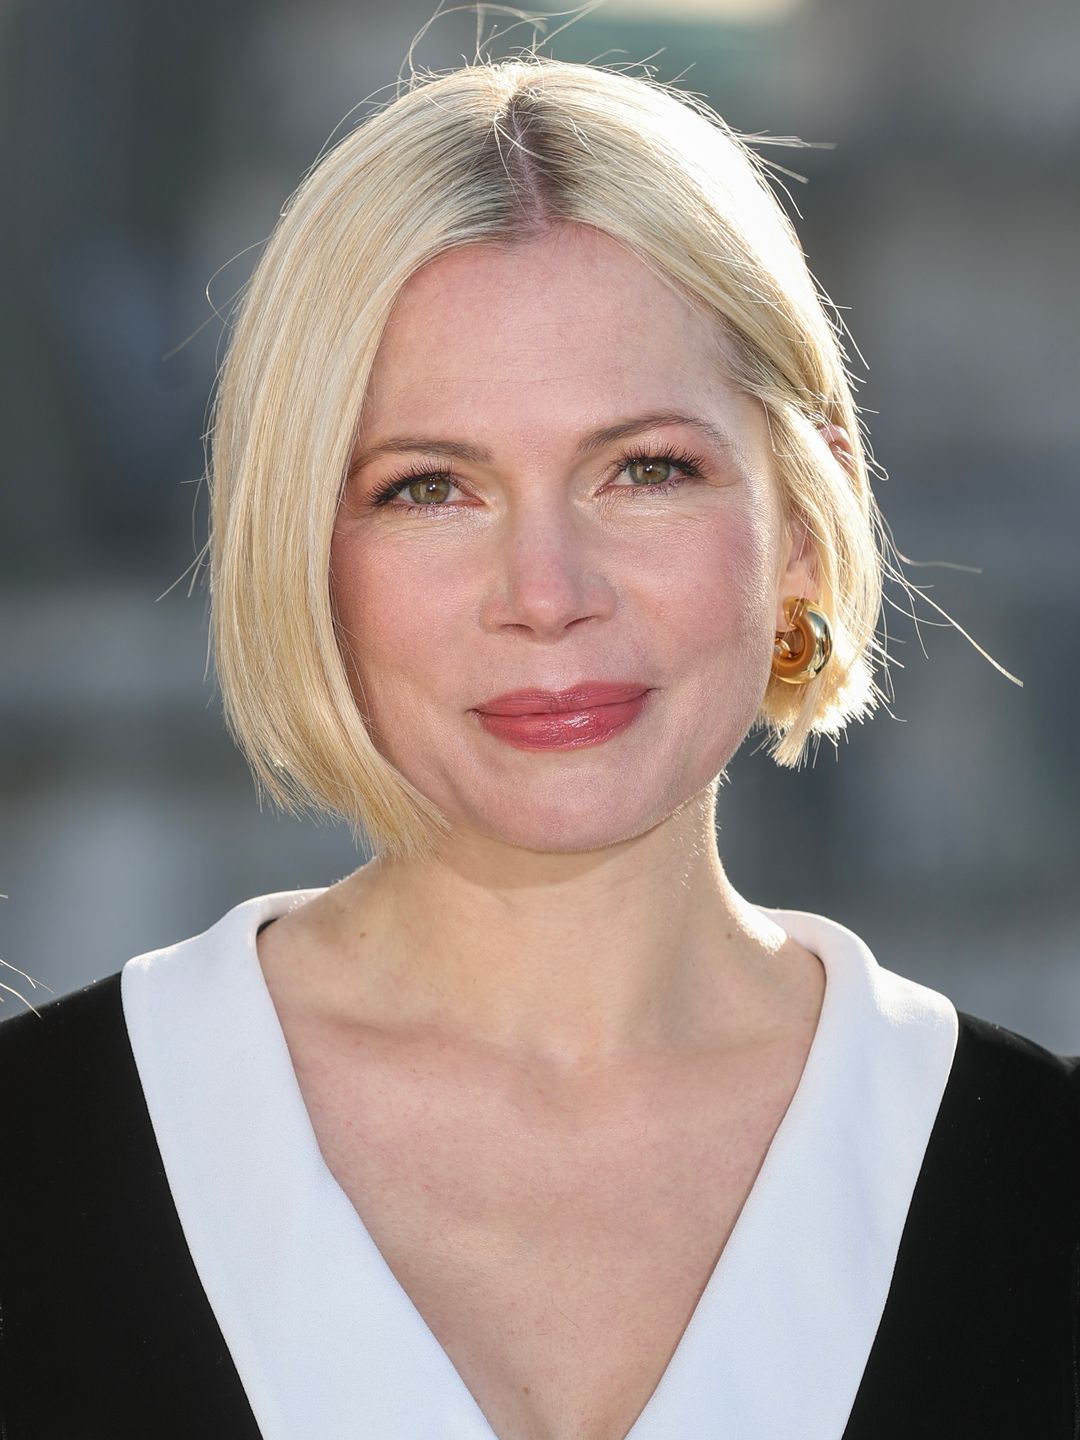 Michelle Williams' rounded bob looks soft and chic 